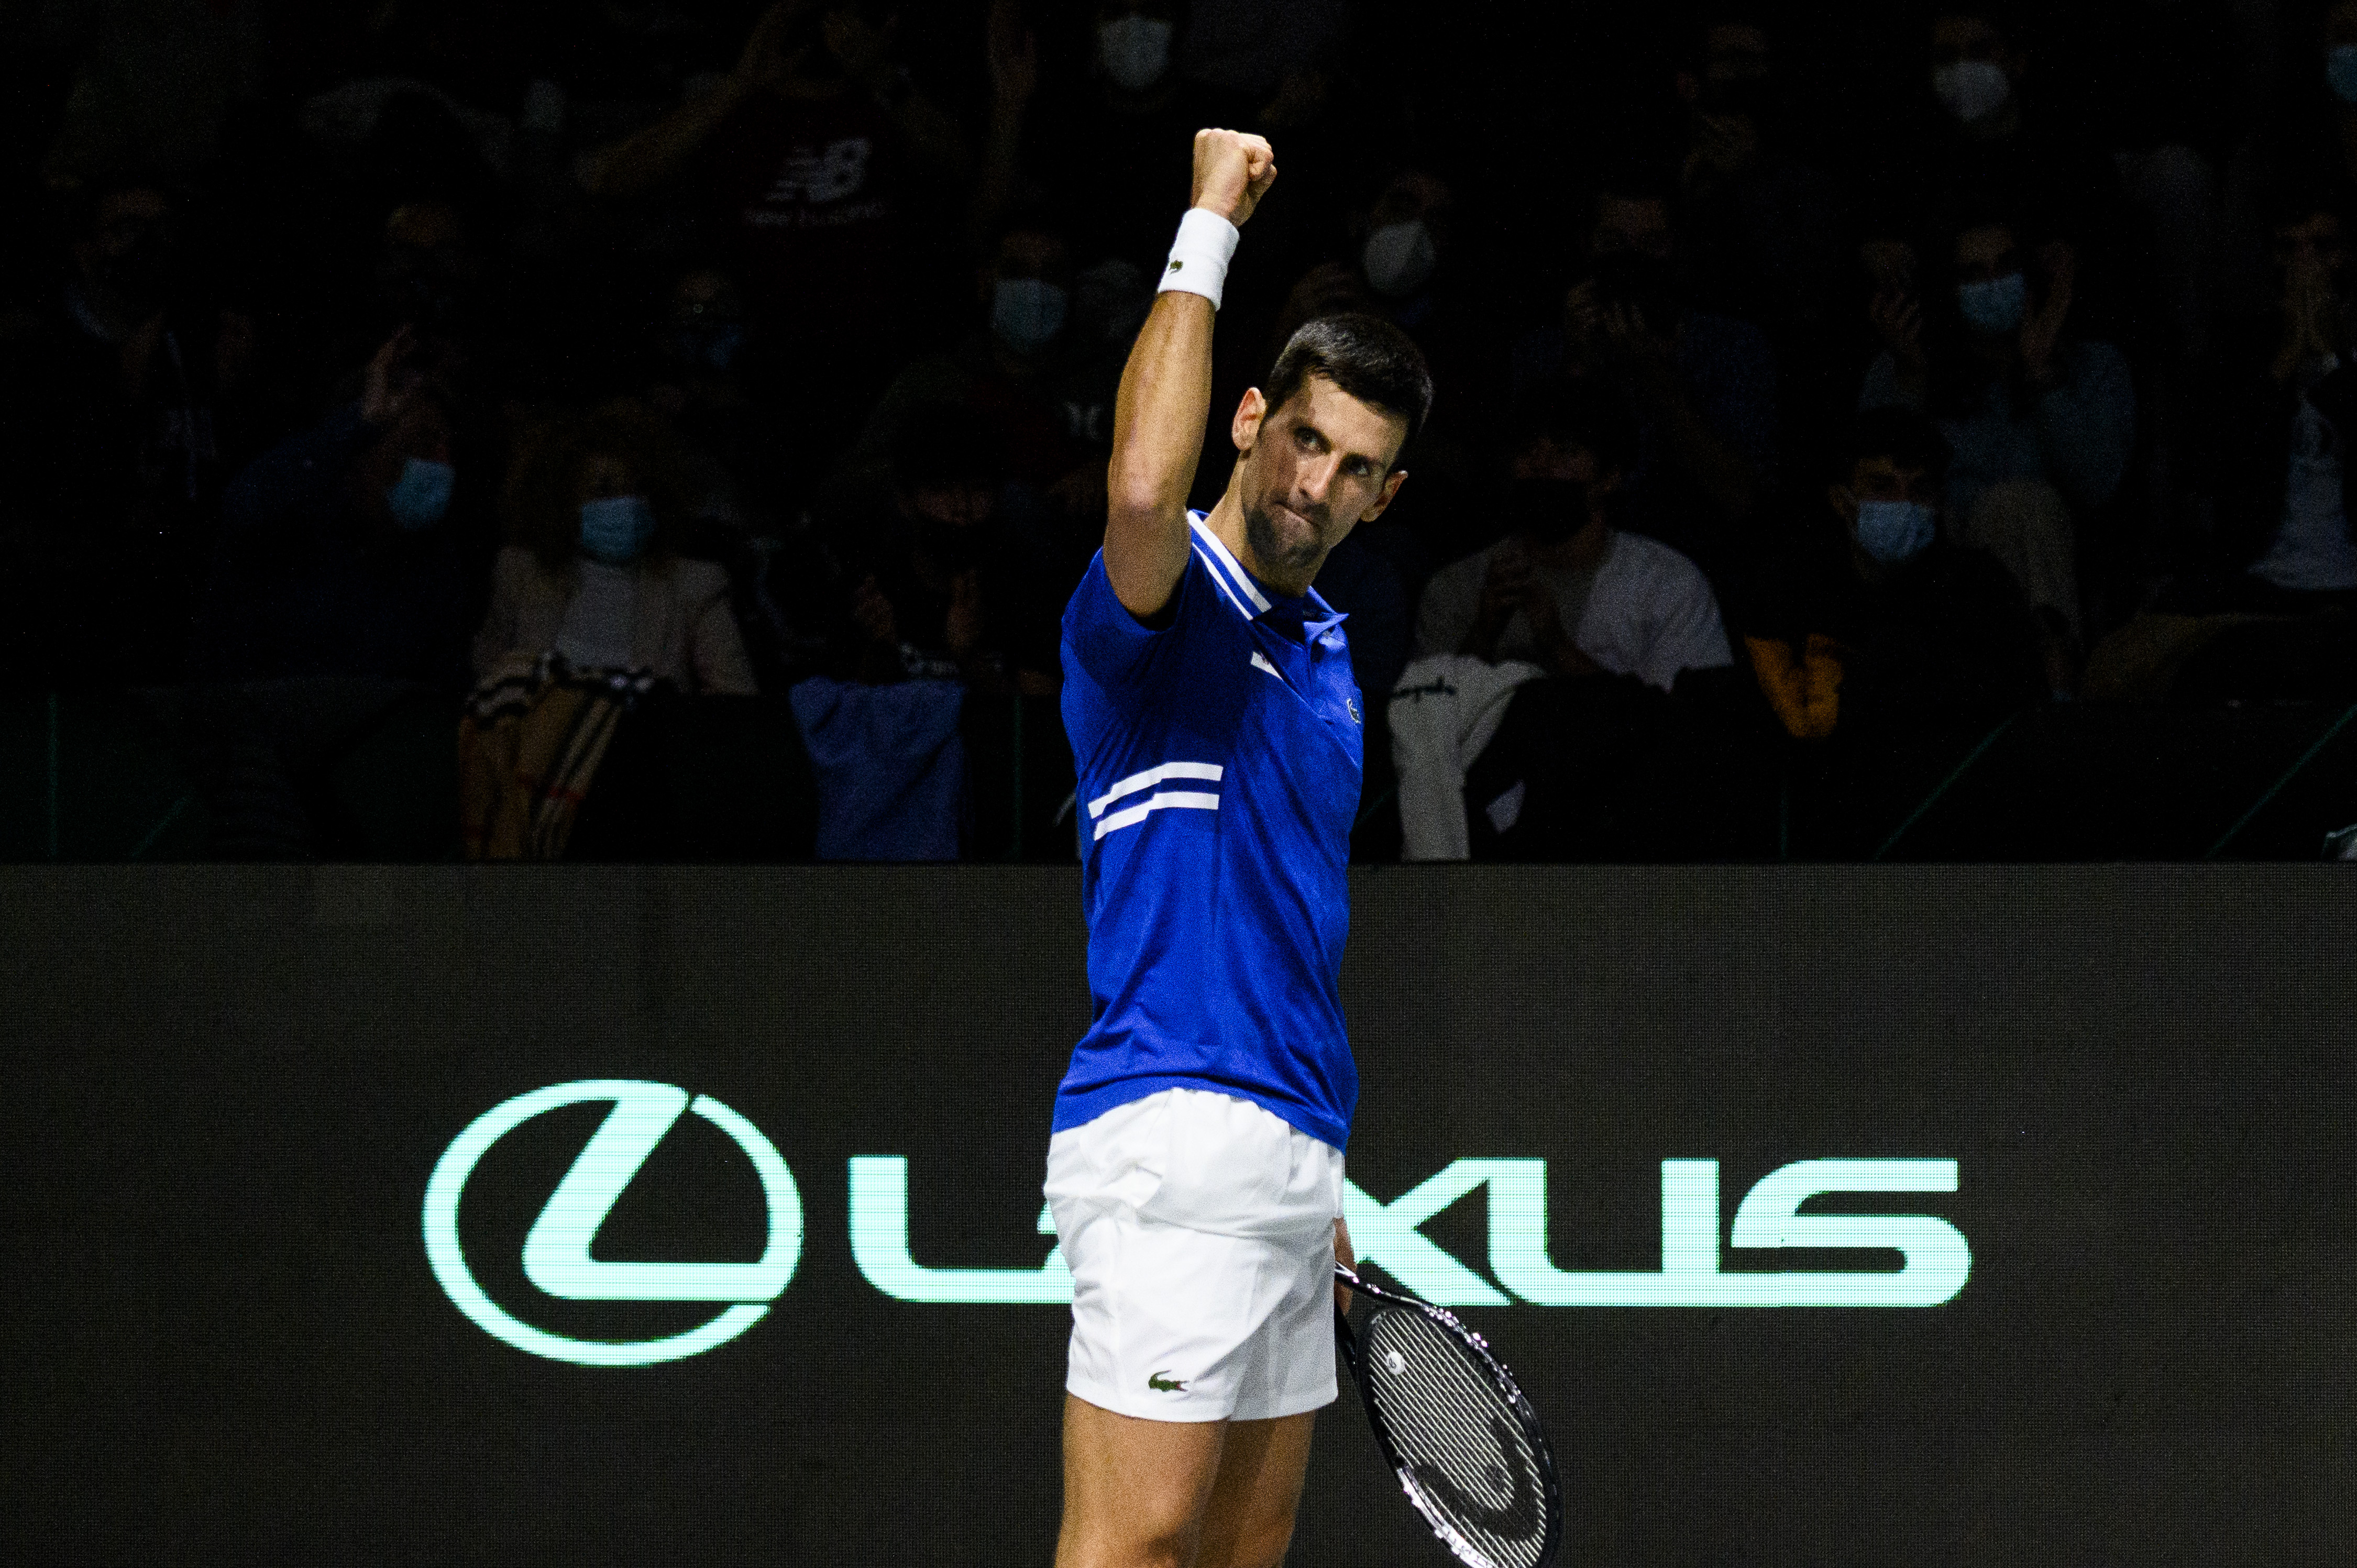 Djokovic Cleared To Play After Winning Visa Battle. But it isn't over yet. thumbnail